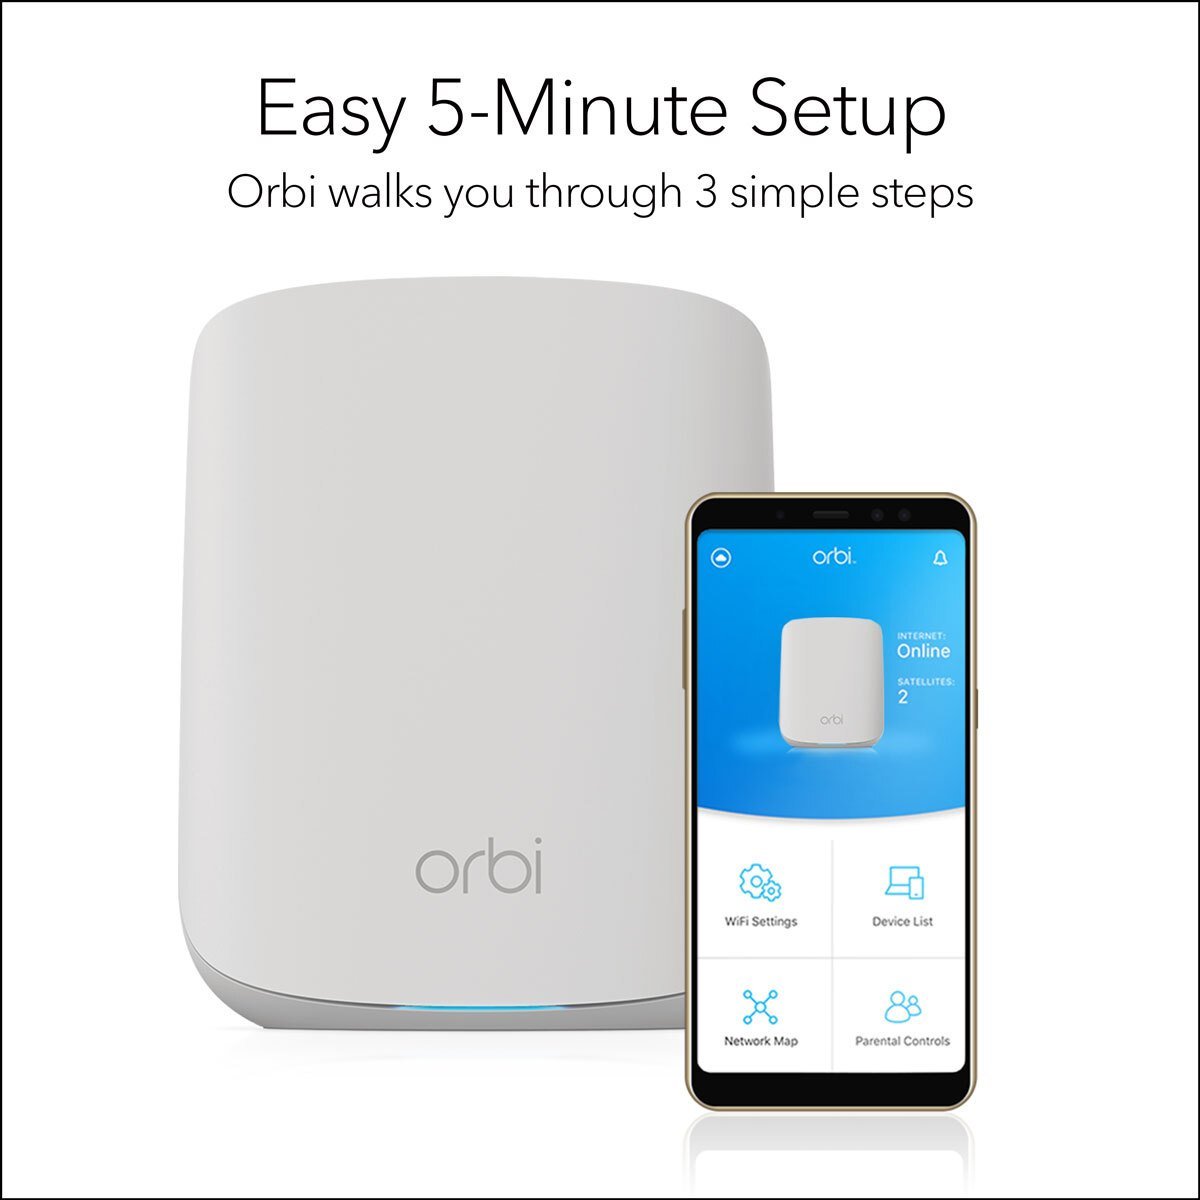 Netgear Orbi RBK353 Whole Home Wifi 6 System - Signature Retail Stores